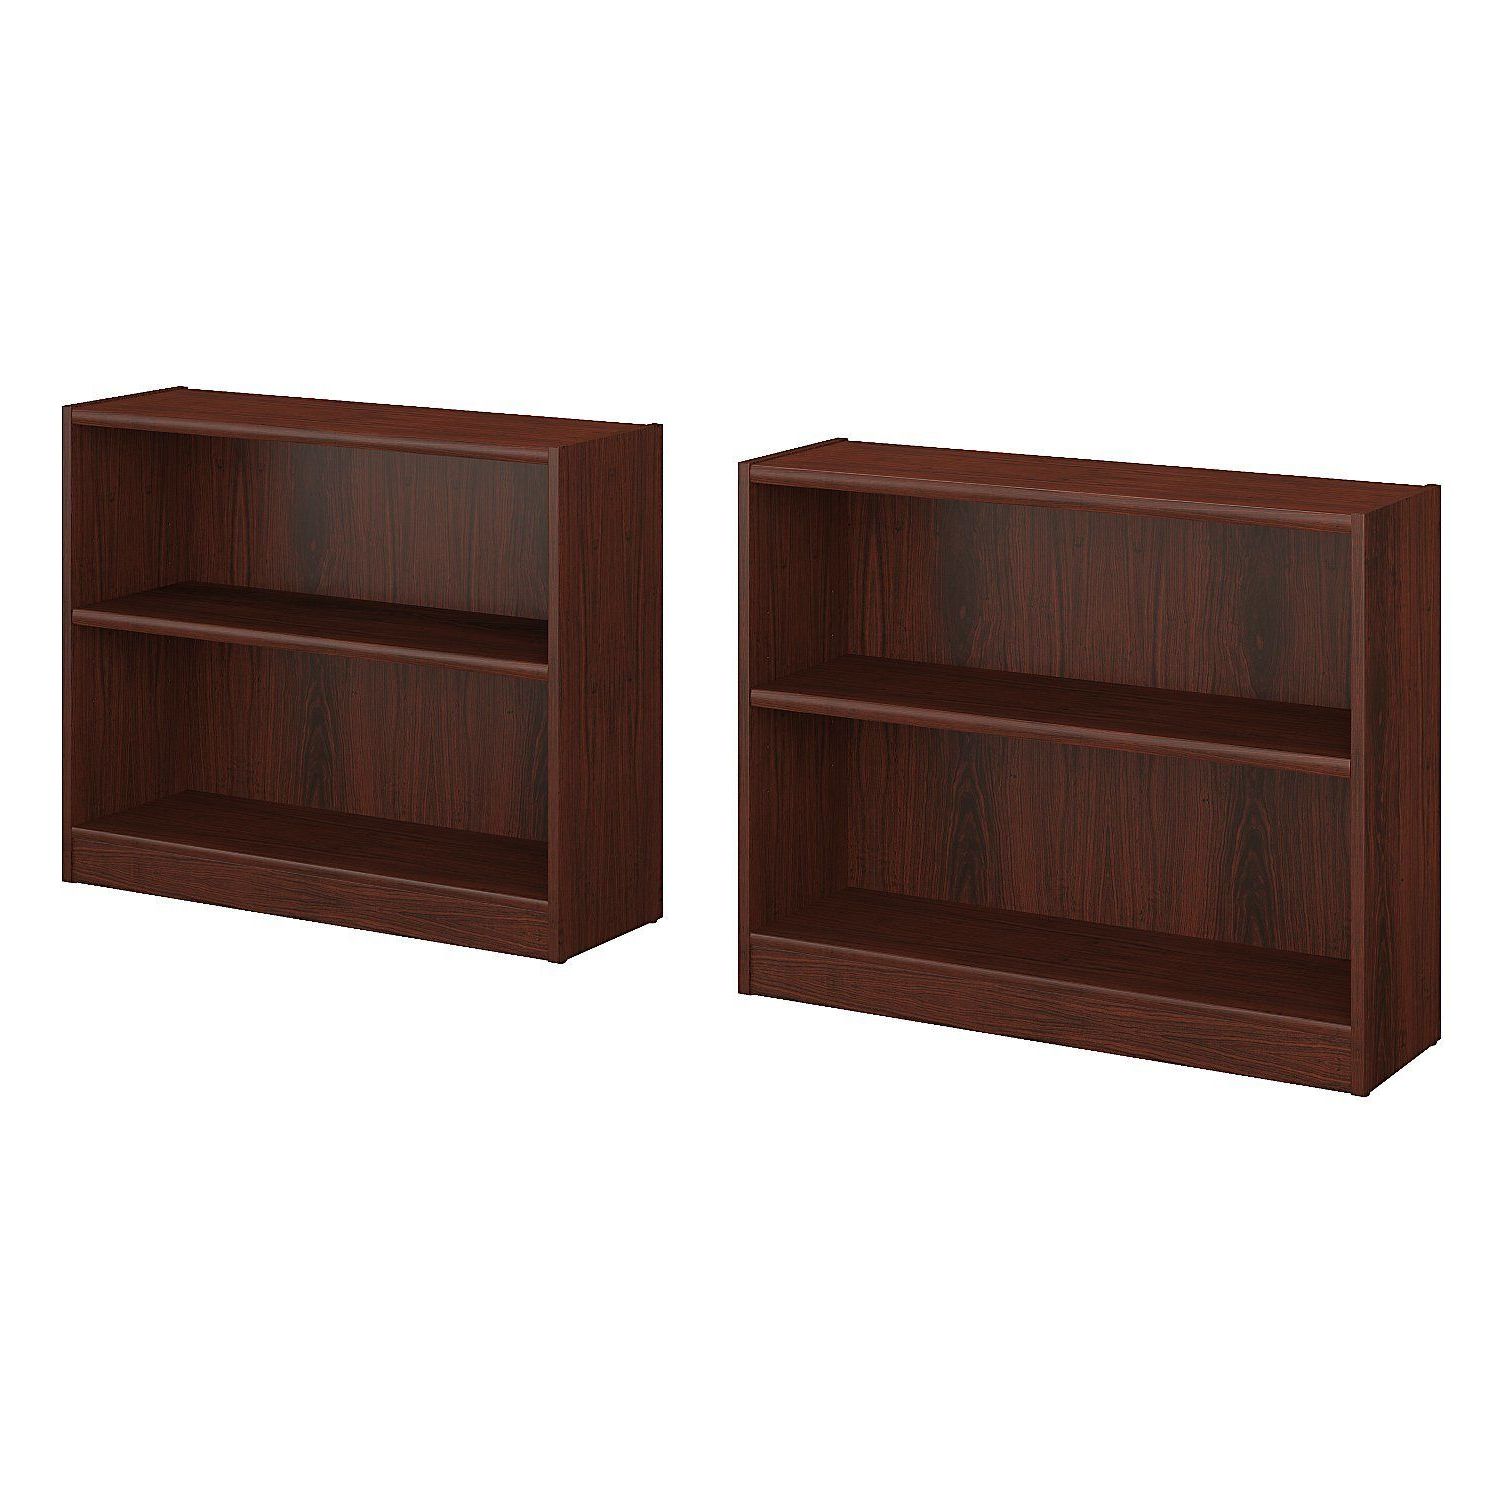 Morrell Standard Bookcases Regarding Best And Newest Hilbert 30" Standard Bookcase (View 19 of 20)